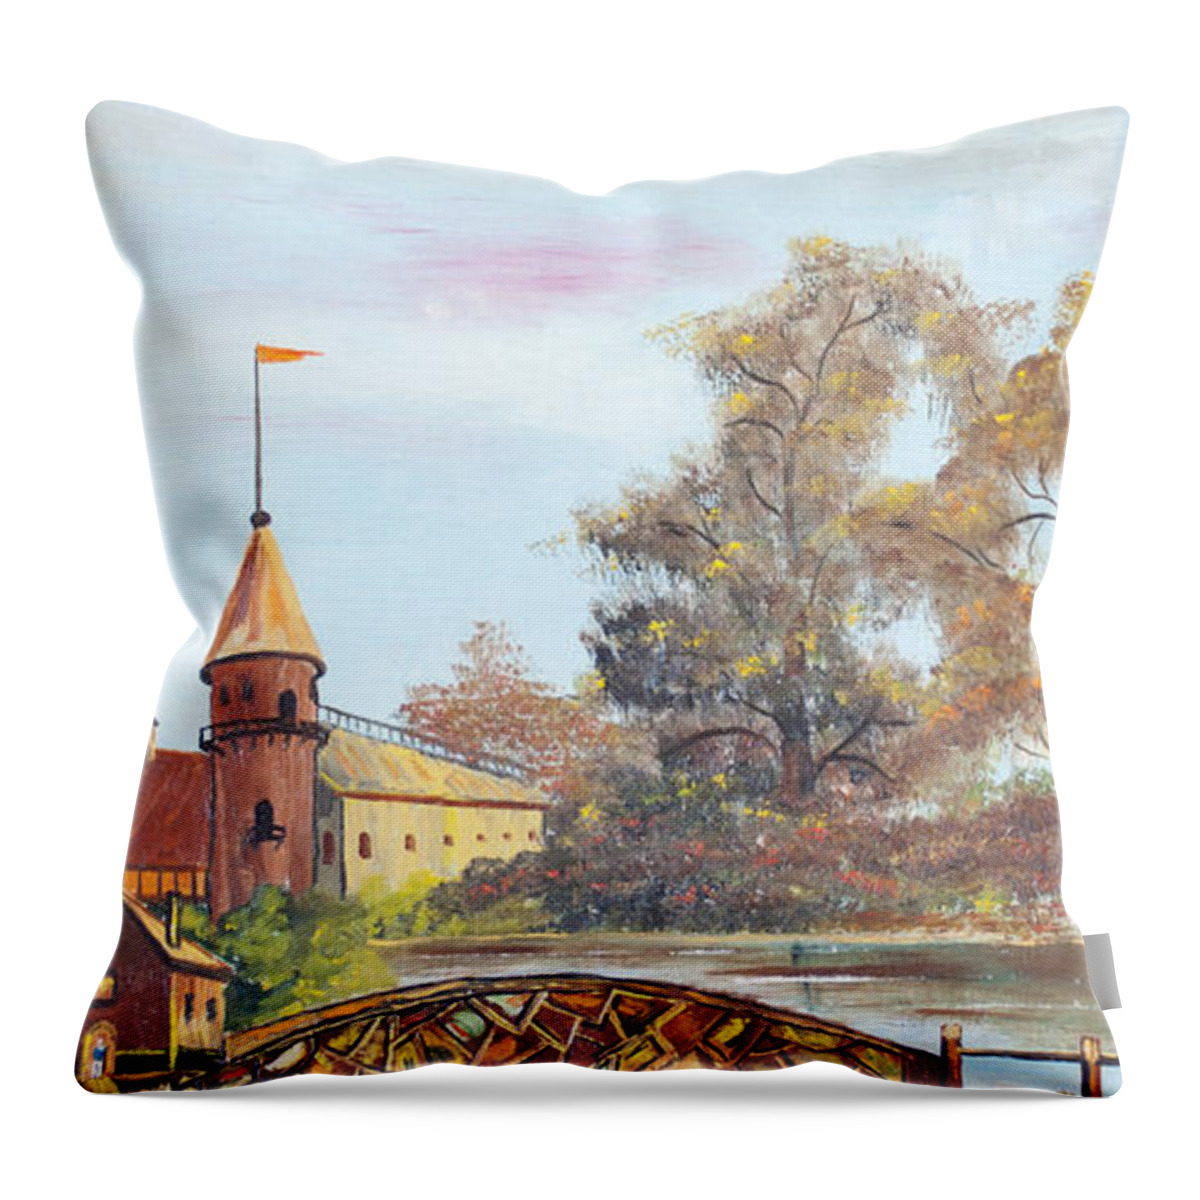 Merlin Reynolds Throw Pillow featuring the painting Stone Bridge over Water by Merlin Reynolds by Fran Riley